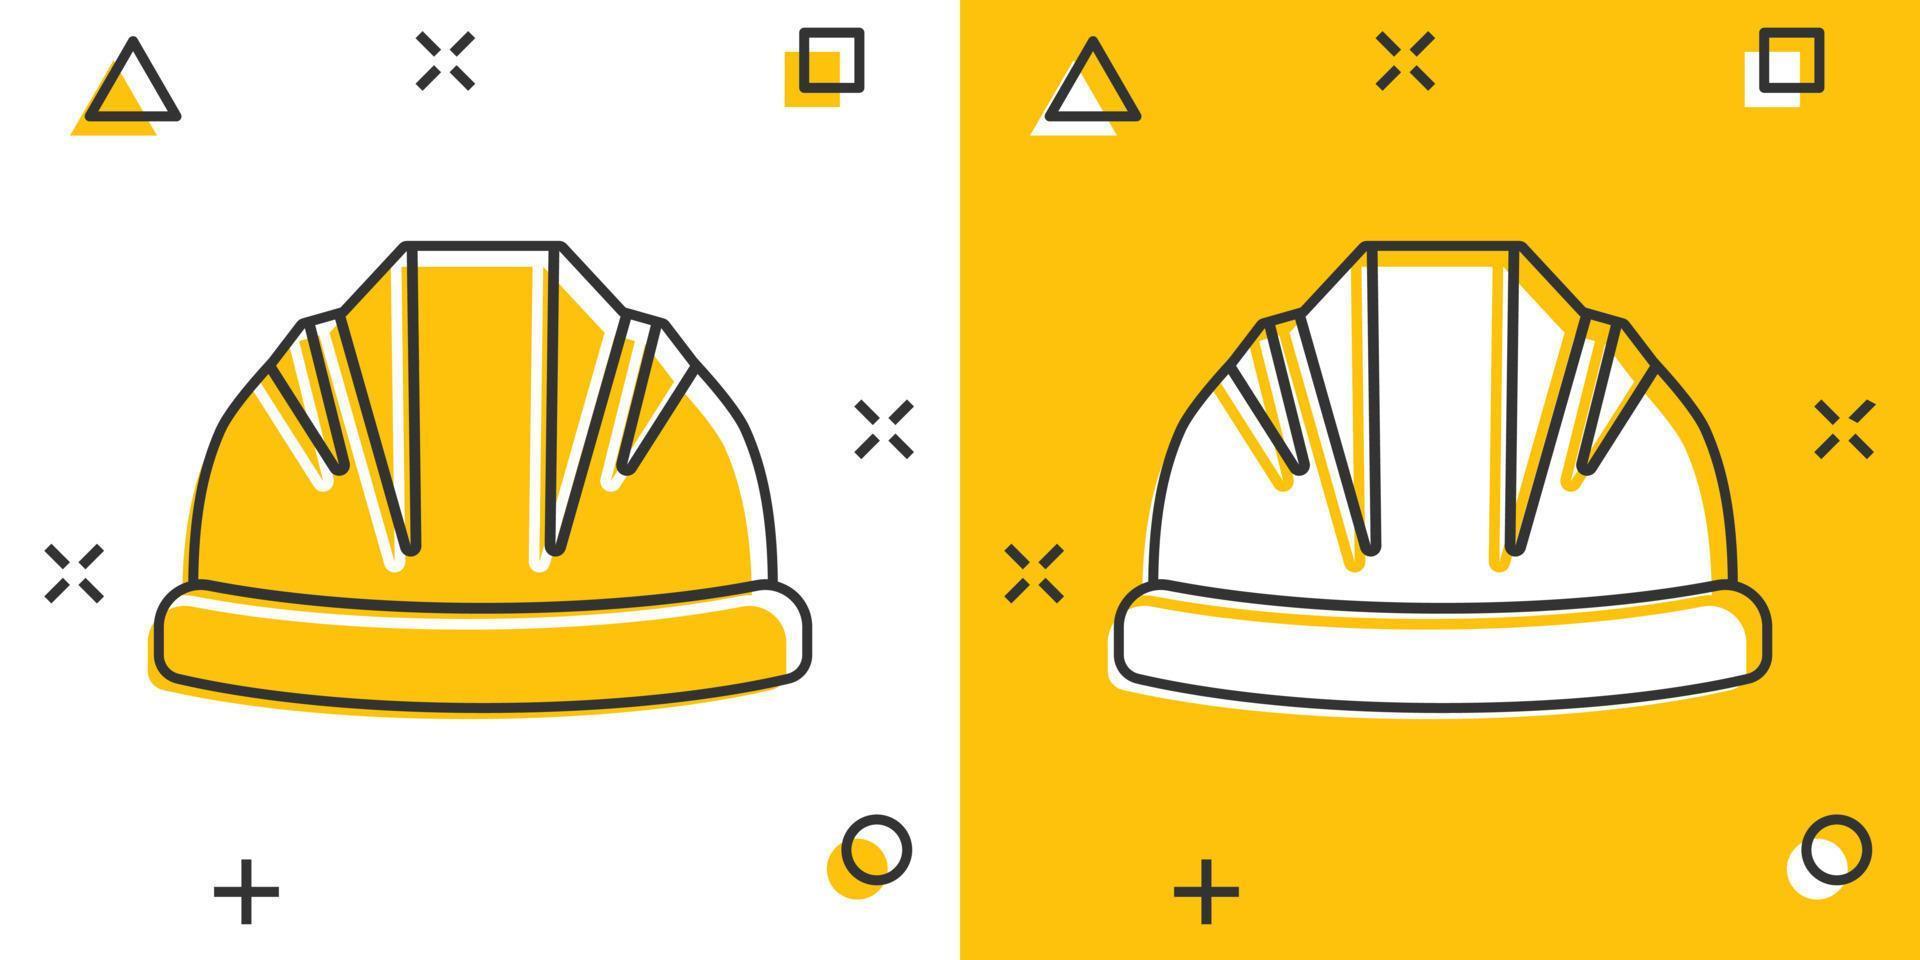 Construction helmet icon in comic style. Safety cap cartoon vector illustration on isolated background. Worker hat splash effect sign business concept.